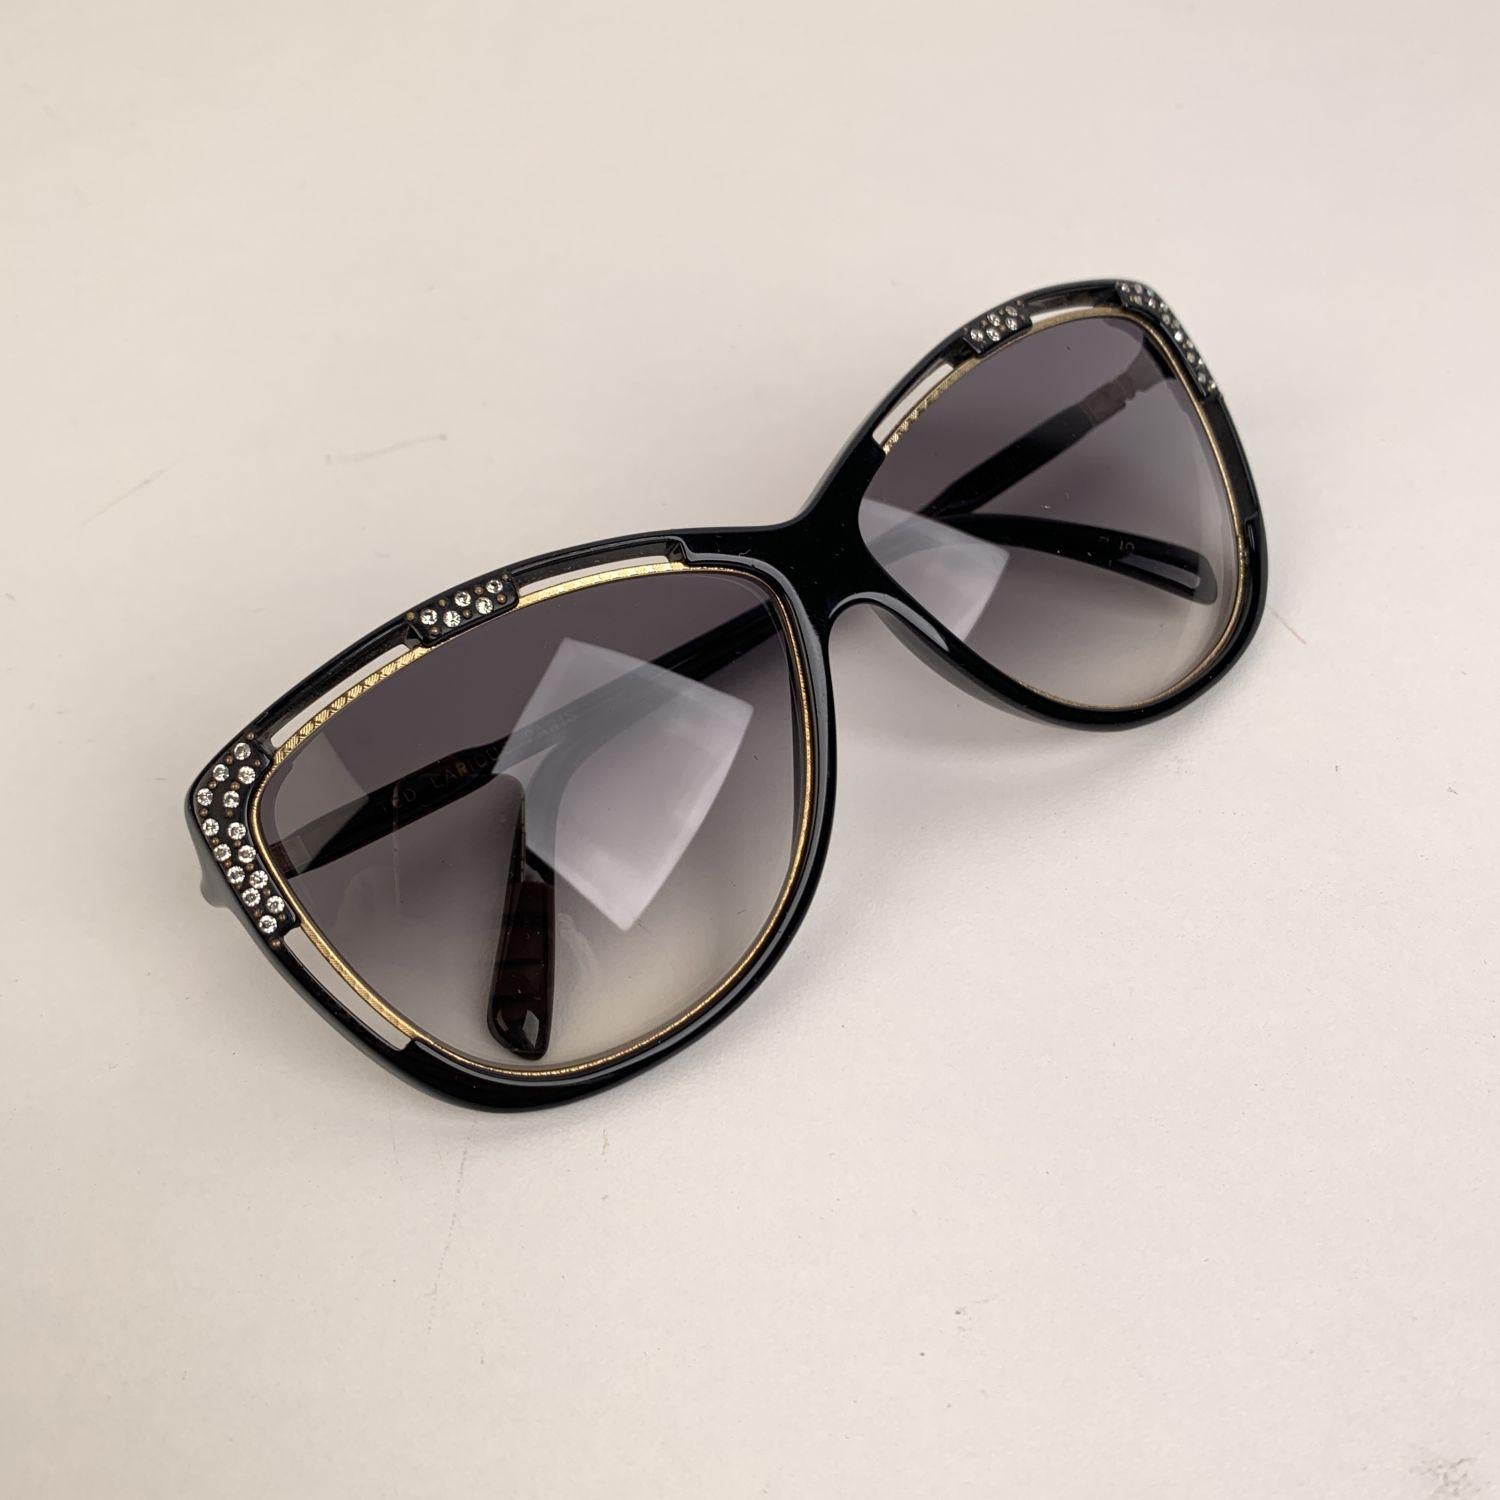 Rare vintage TED LAPIDUS oversized sunglasses mod. TL17 01, from the '90s. Made in France. Black oversized cat-eye acetate frame with gold metal accents and crystal embellishment. Gray gradient lenses. 100% UV supreme quality